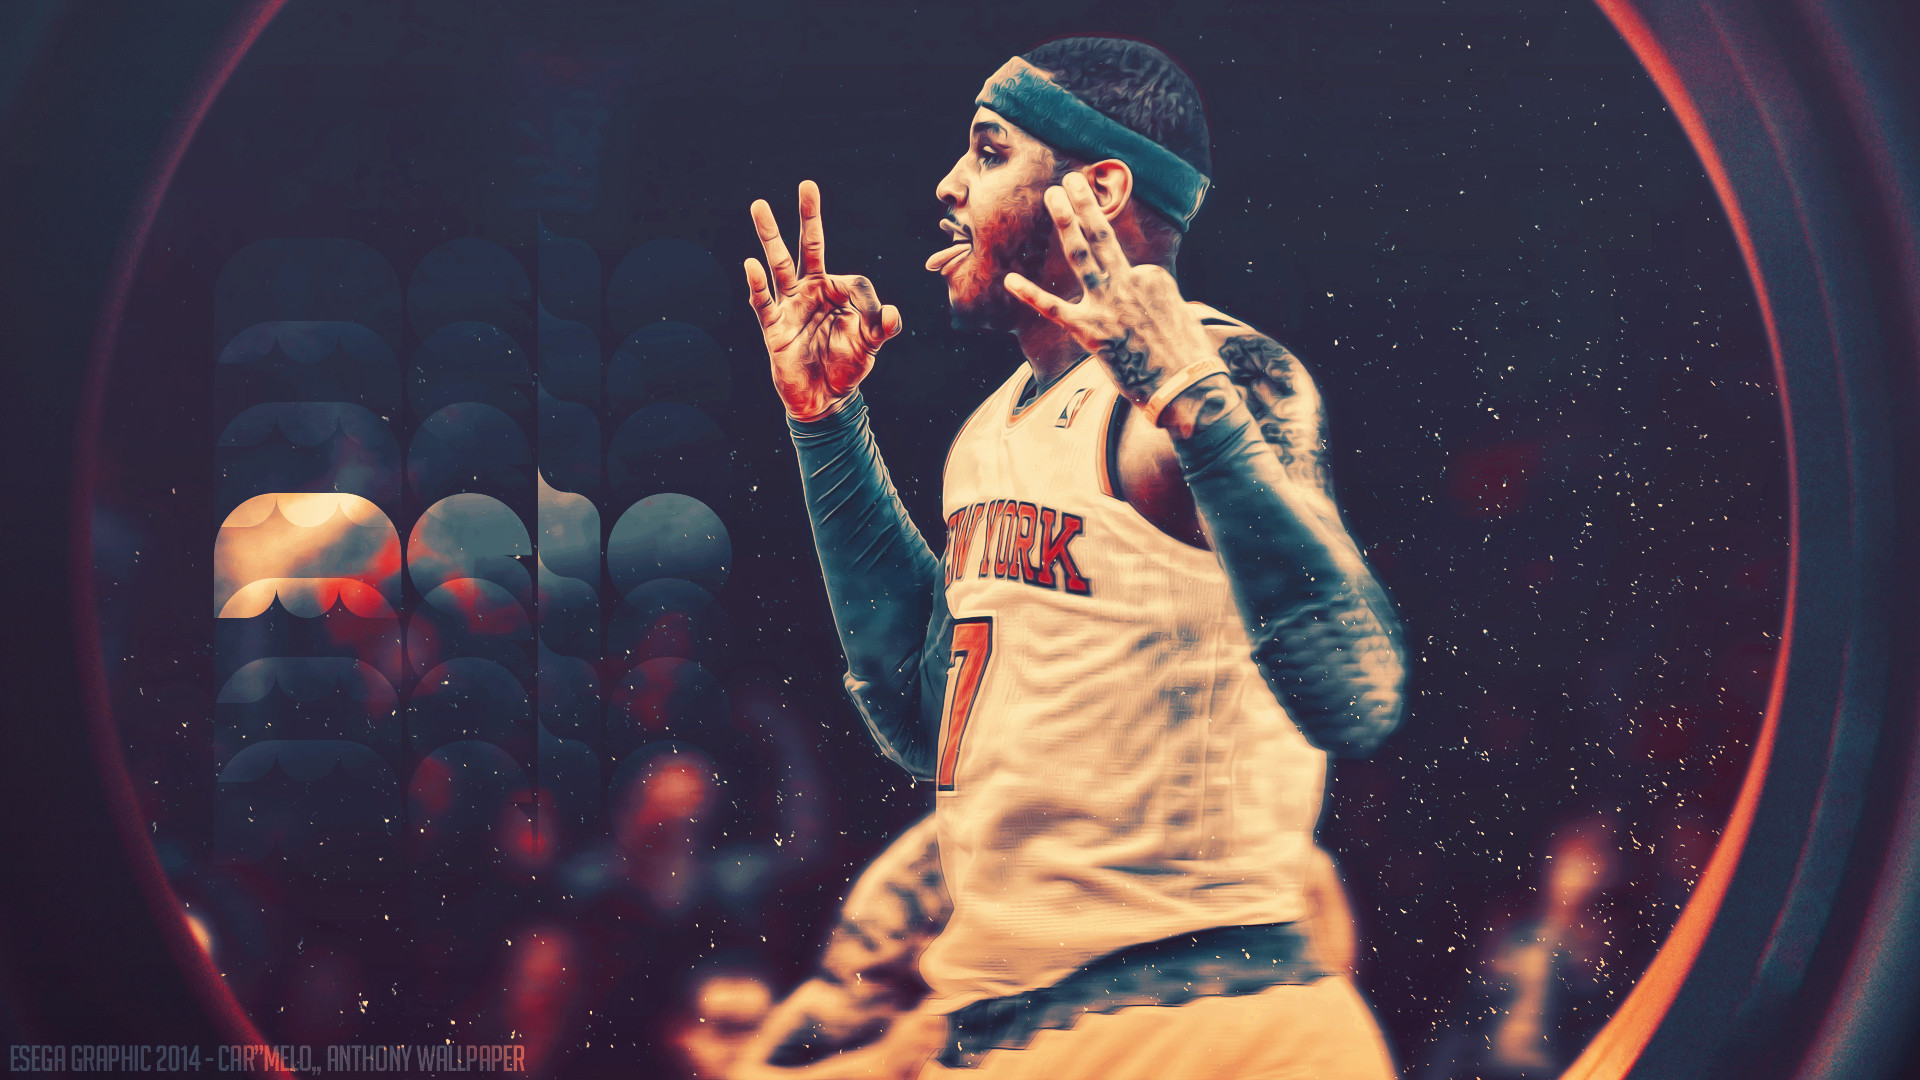 1920x1080 ... Carmelo Anthony Nyk Wallpaper - Version 2 by EsegaGraphic